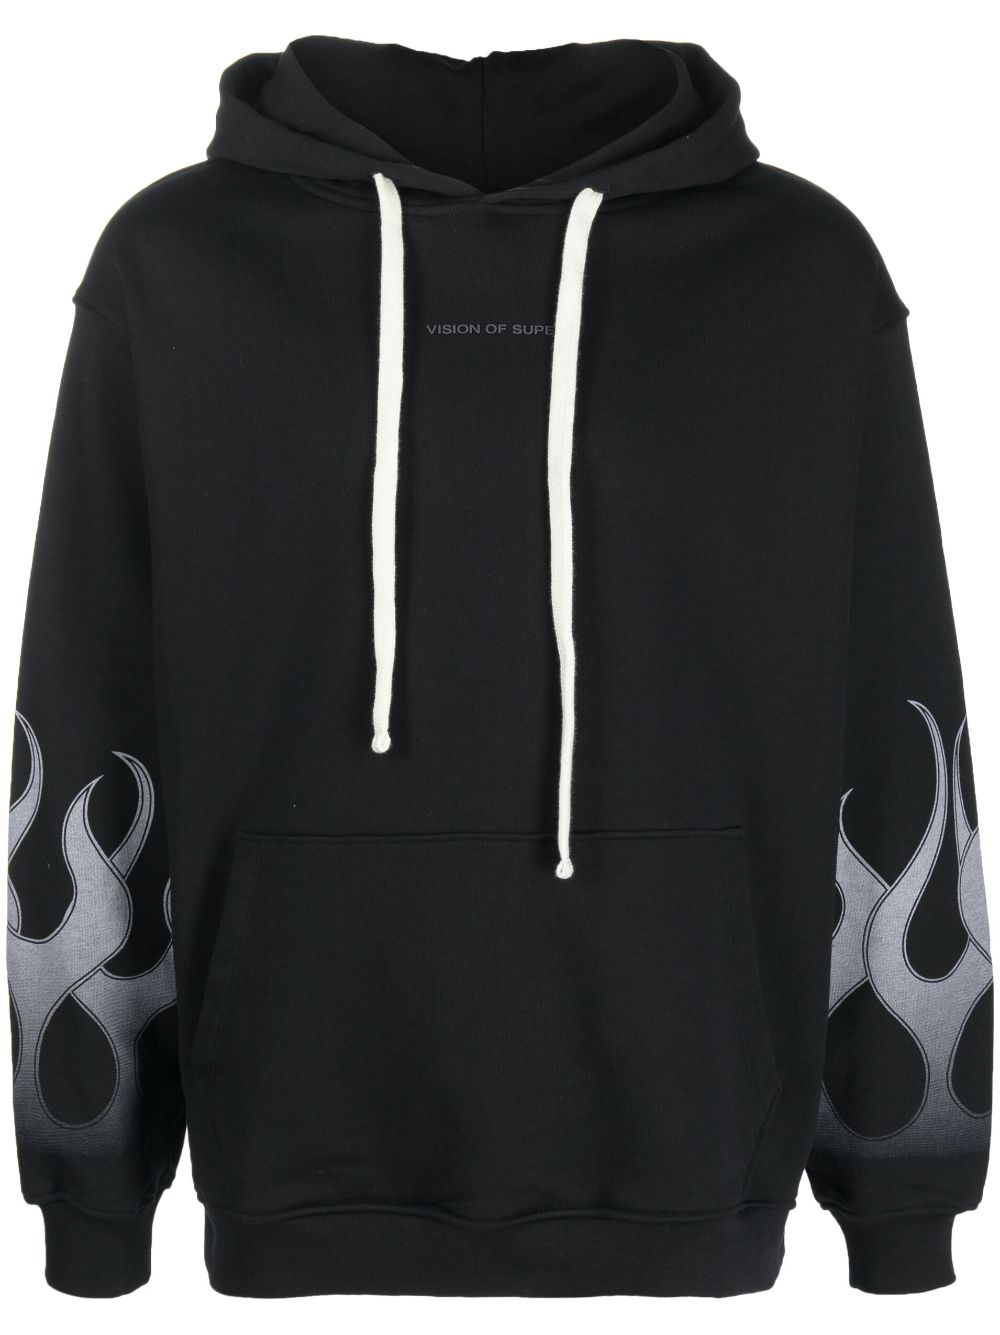 VISION OF SUPER NEGATIVE WHITE FLAMES HOODIE